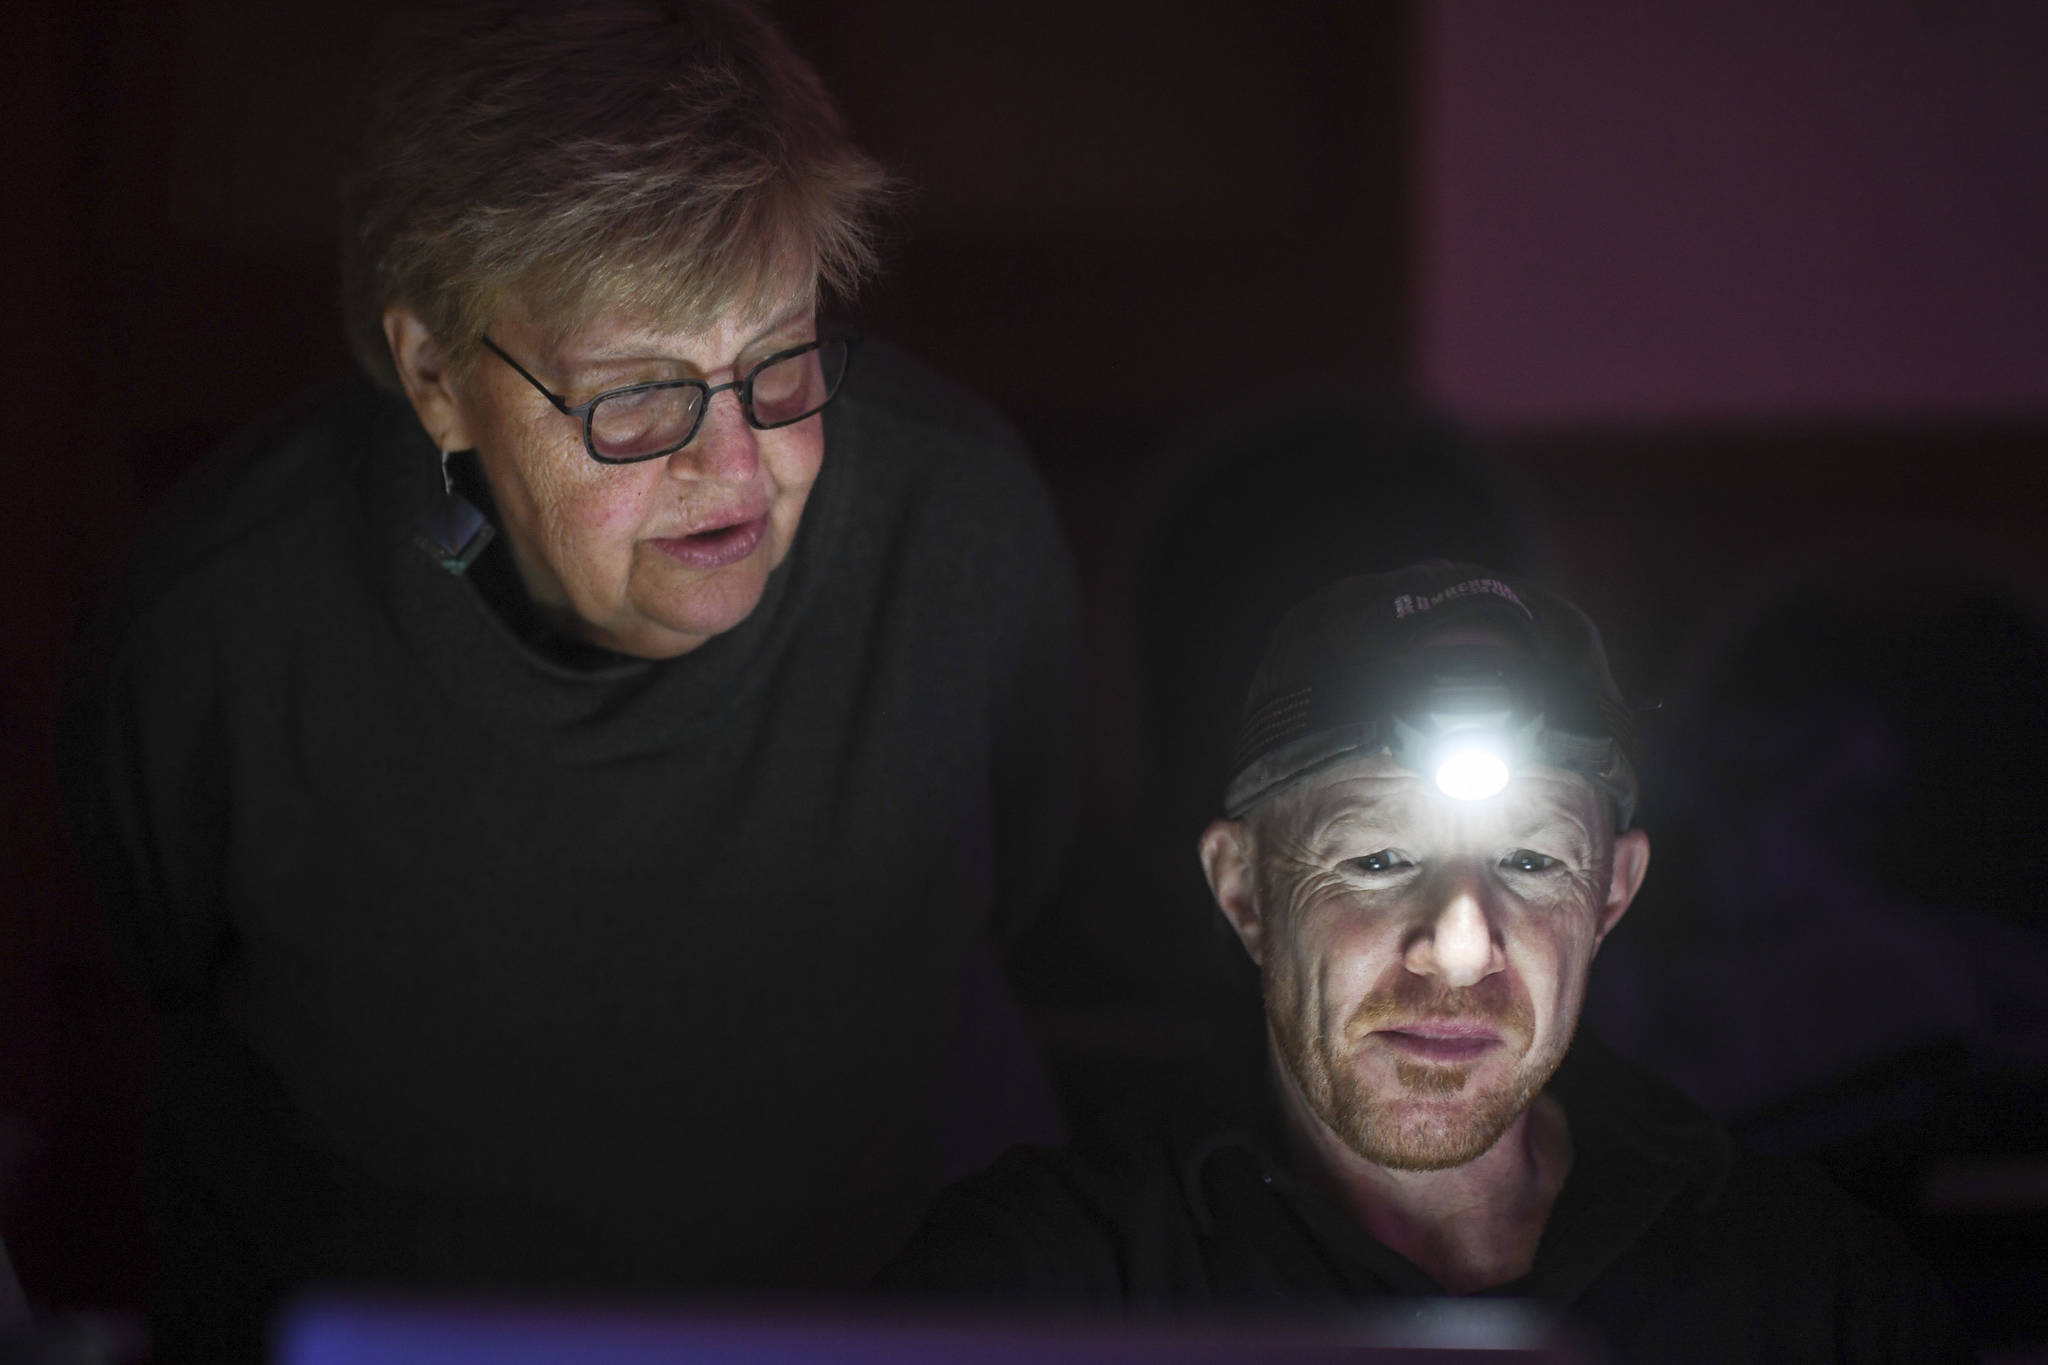 Playwright Maureen Longworth, left, and director Roblin Gray Davis work on the production of “Blue Ticket” at McPhetres Hall on Tuesday, Oct. 15, 2019. (Michael Penn | Juneau Empire)